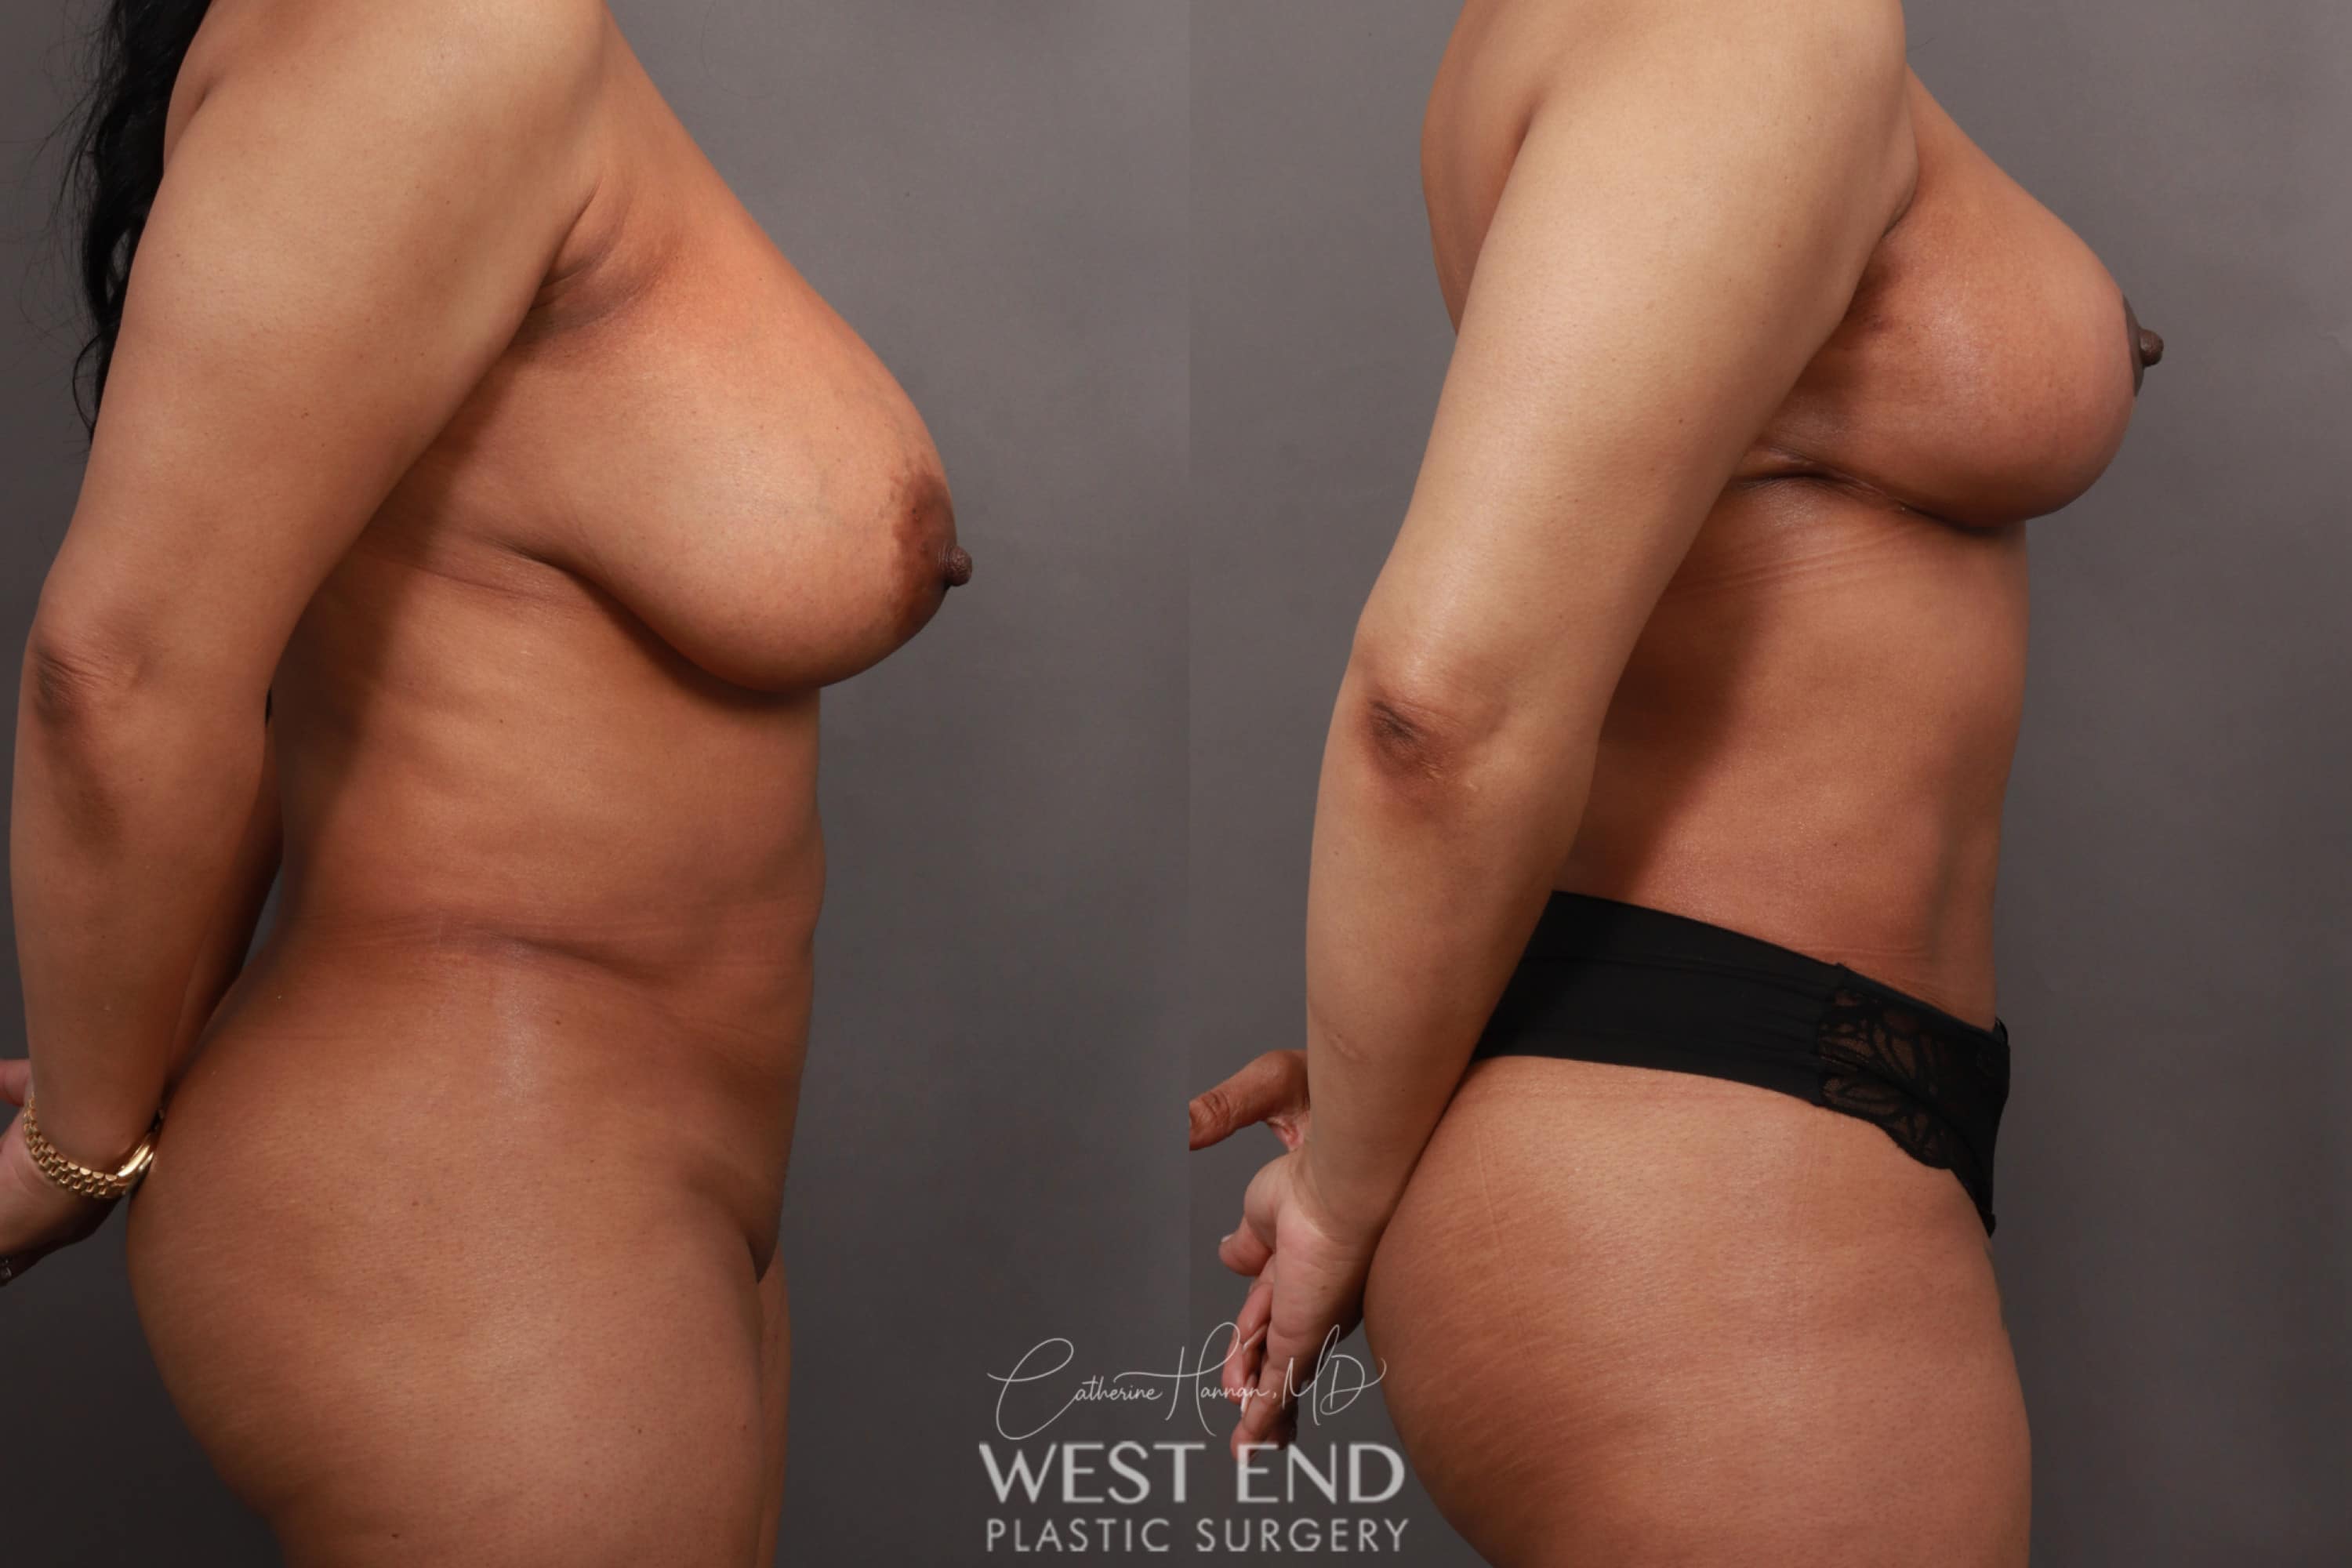 Breast Reduction with a Reverse Abdominal Lift & Liposuction (2 Months Post-Op)